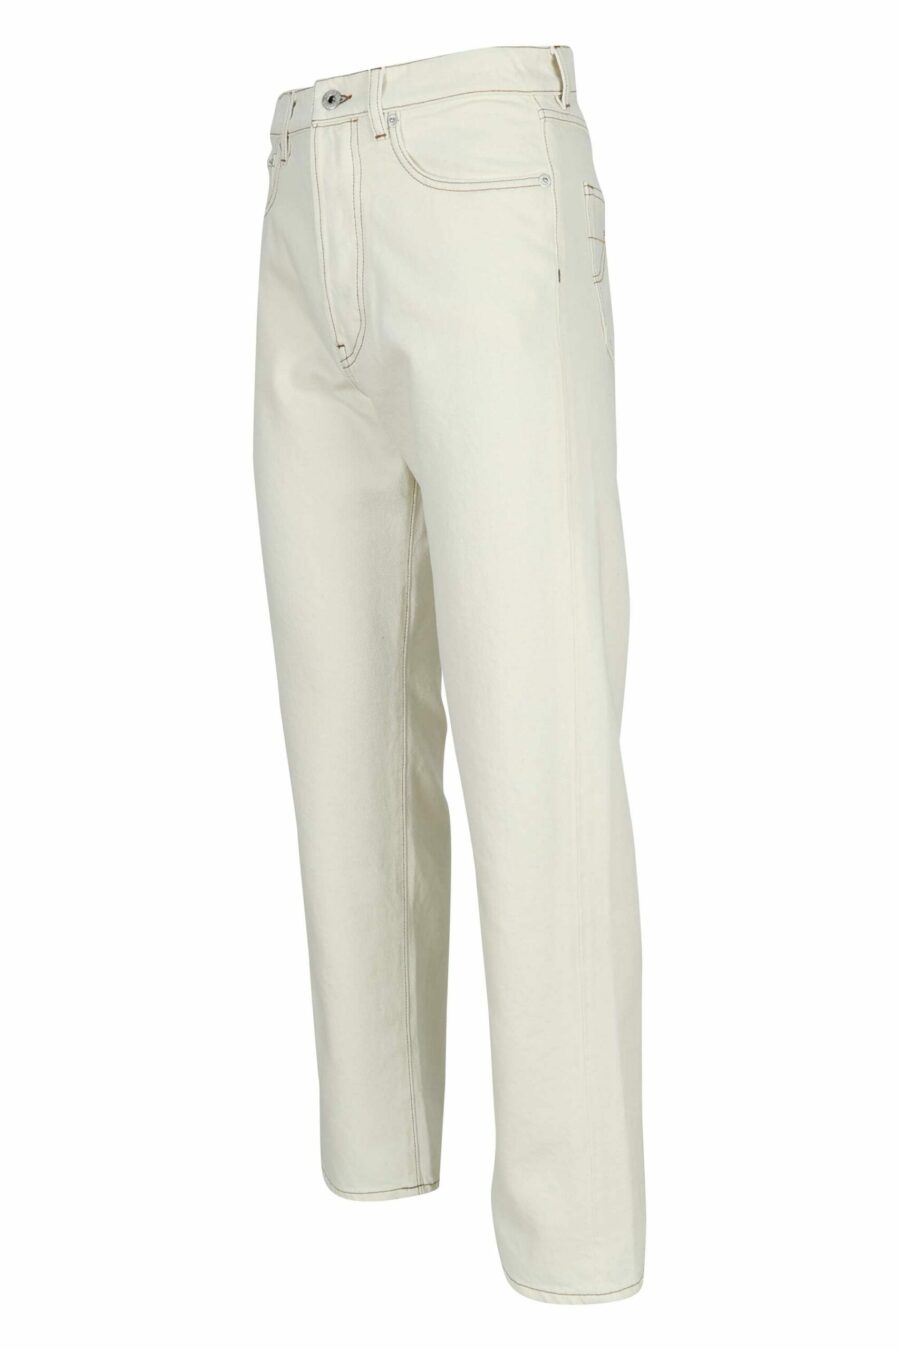 White jeans with "k" logo - 3612230591813 1 scaled